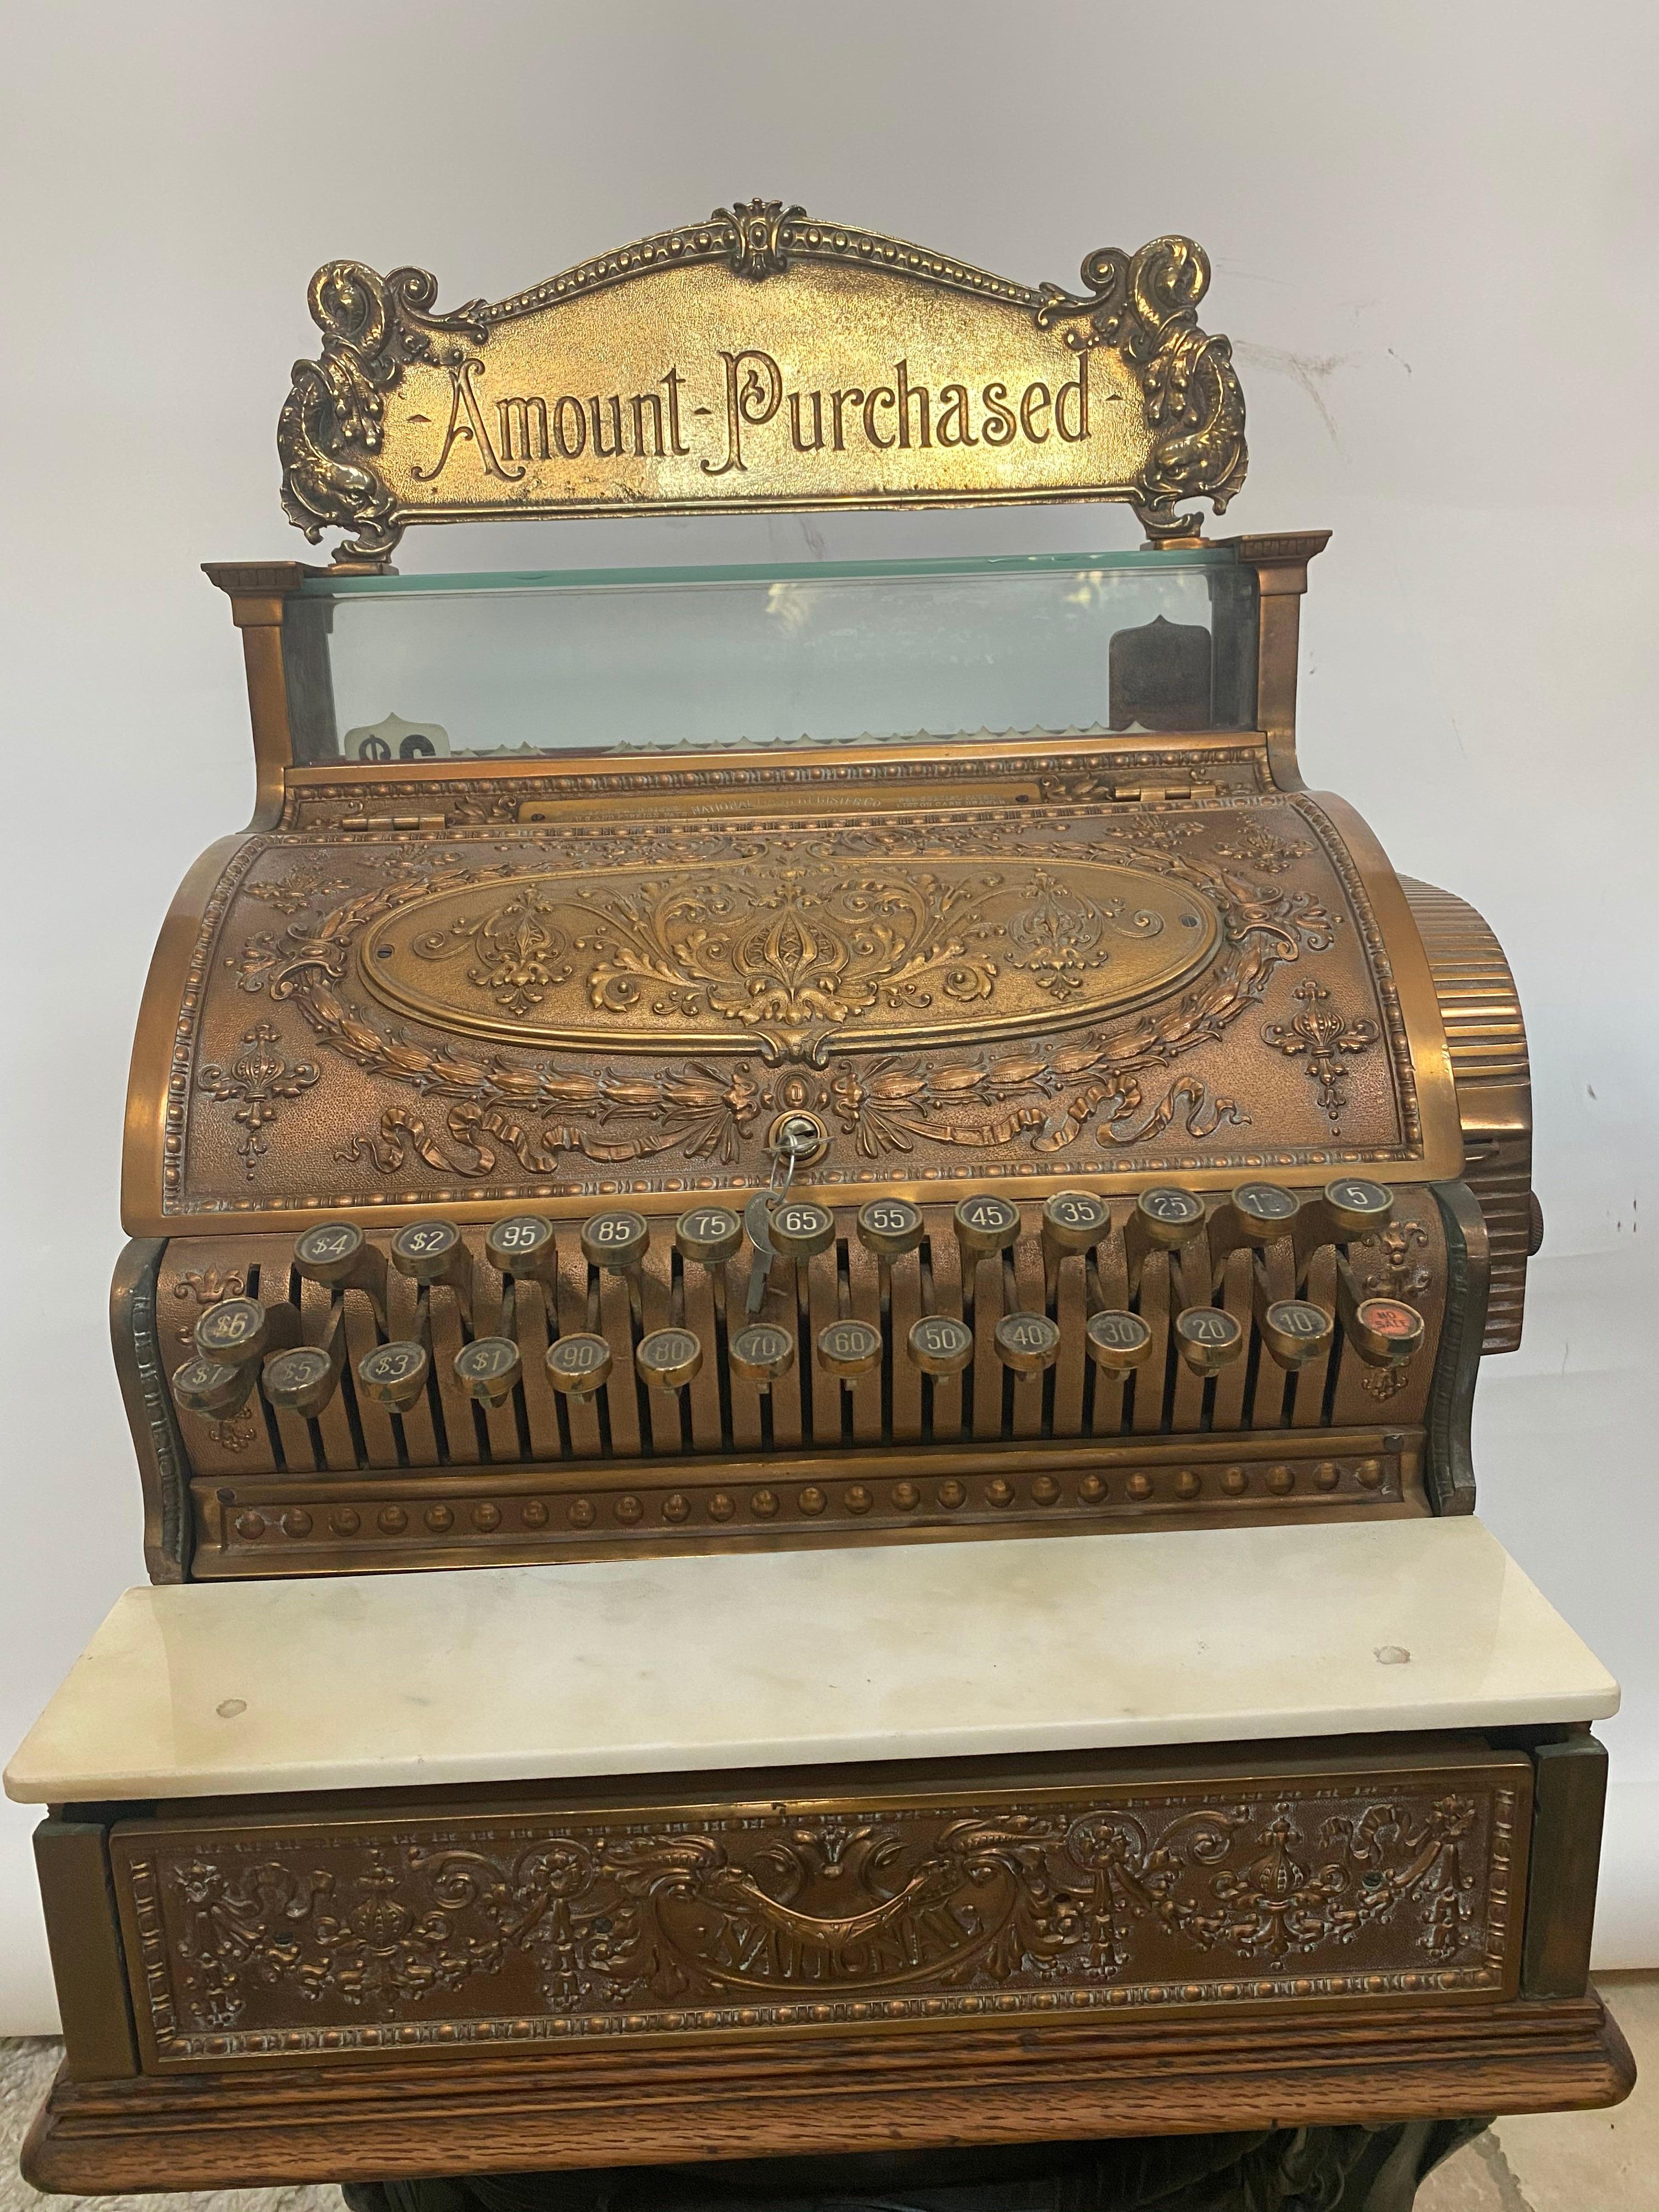 Antique National Cash Register Company cash bronze excellent condition, Amount Purchased, 395 styles and sizes 1200 U.S. and foreign pats, national cash register CO, Dayton Ohio USA, see special patent Liston cash drawer. Size number 47 1/2, factory